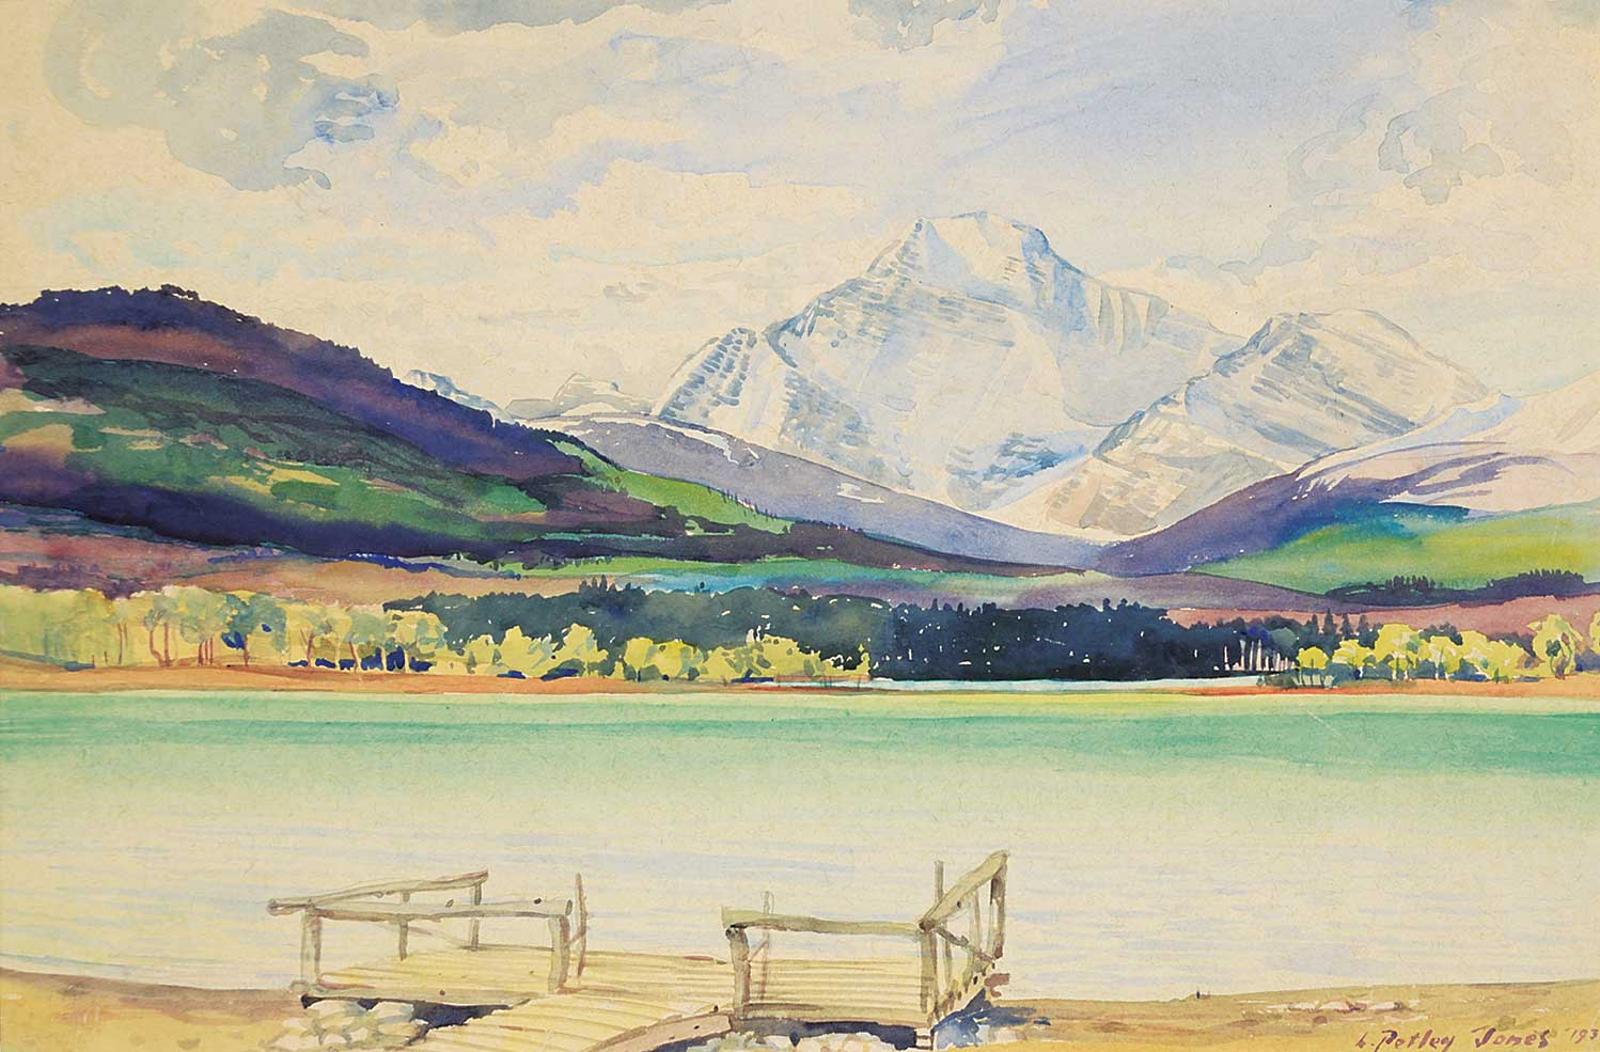 Llewellyn Petley-Jones (1908-1986) - May at Jasper, A View of Mount Edith Cavell from Lake Edith